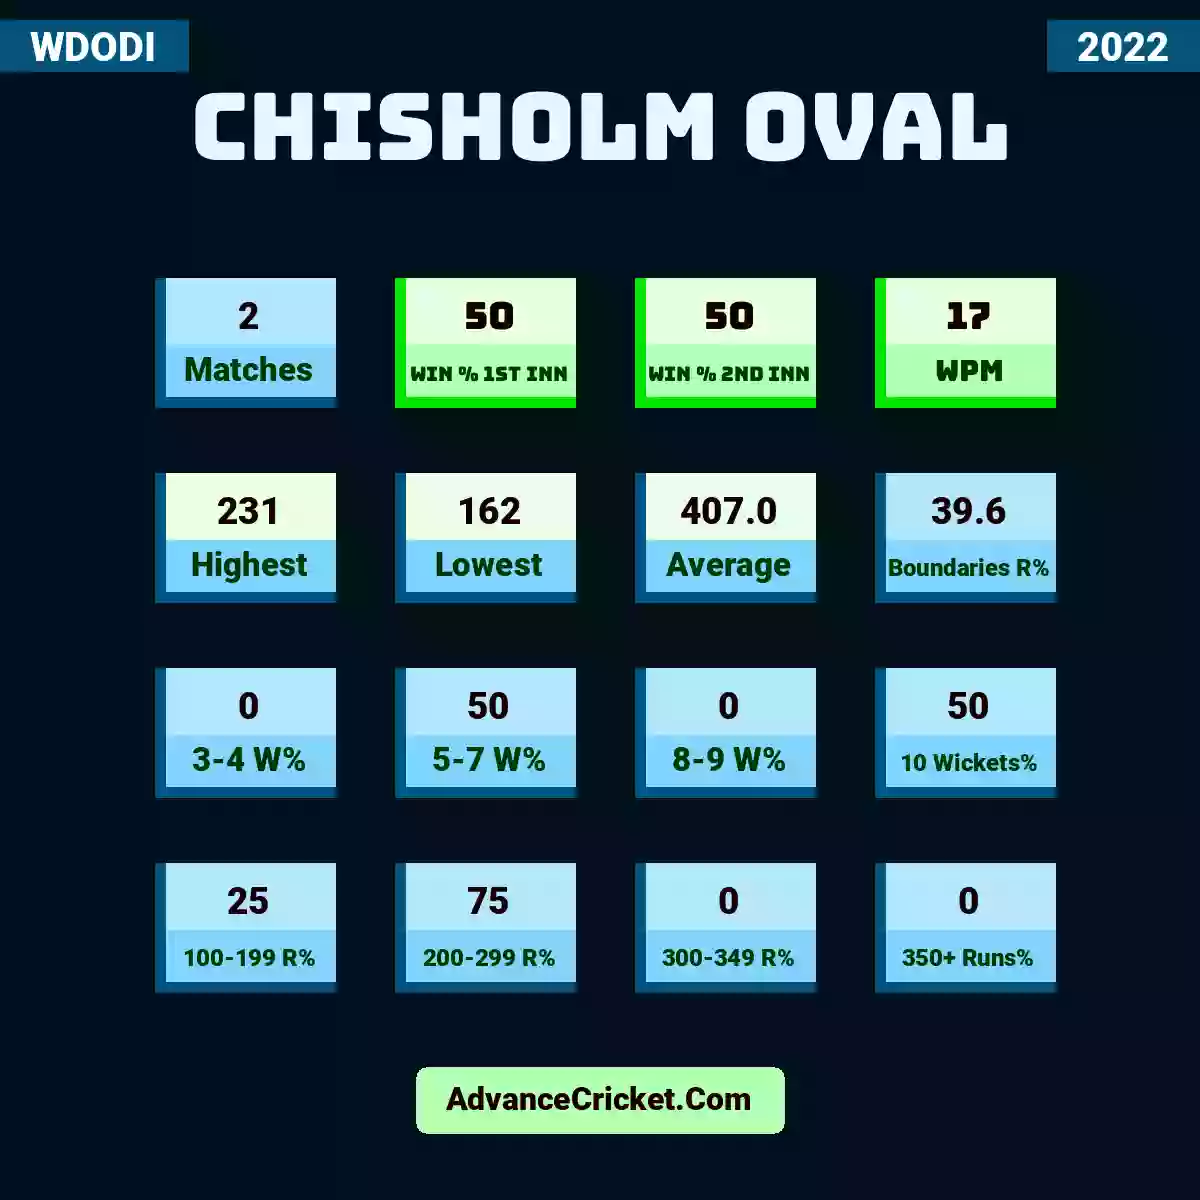 Image showing Chisholm Oval with Matches: 2, Win % 1st Inn: 50, Win % 2nd Inn: 50, WPM: 17, Highest: 231, Lowest: 162, Average: 407.0, Boundaries R%: 39.6, 3-4 W%: 0, 5-7 W%: 50, 8-9 W%: 0, 10 Wickets%: 50, 100-199 R%: 25, 200-299 R%: 75, 300-349 R%: 0, 350+ Runs%: 0.